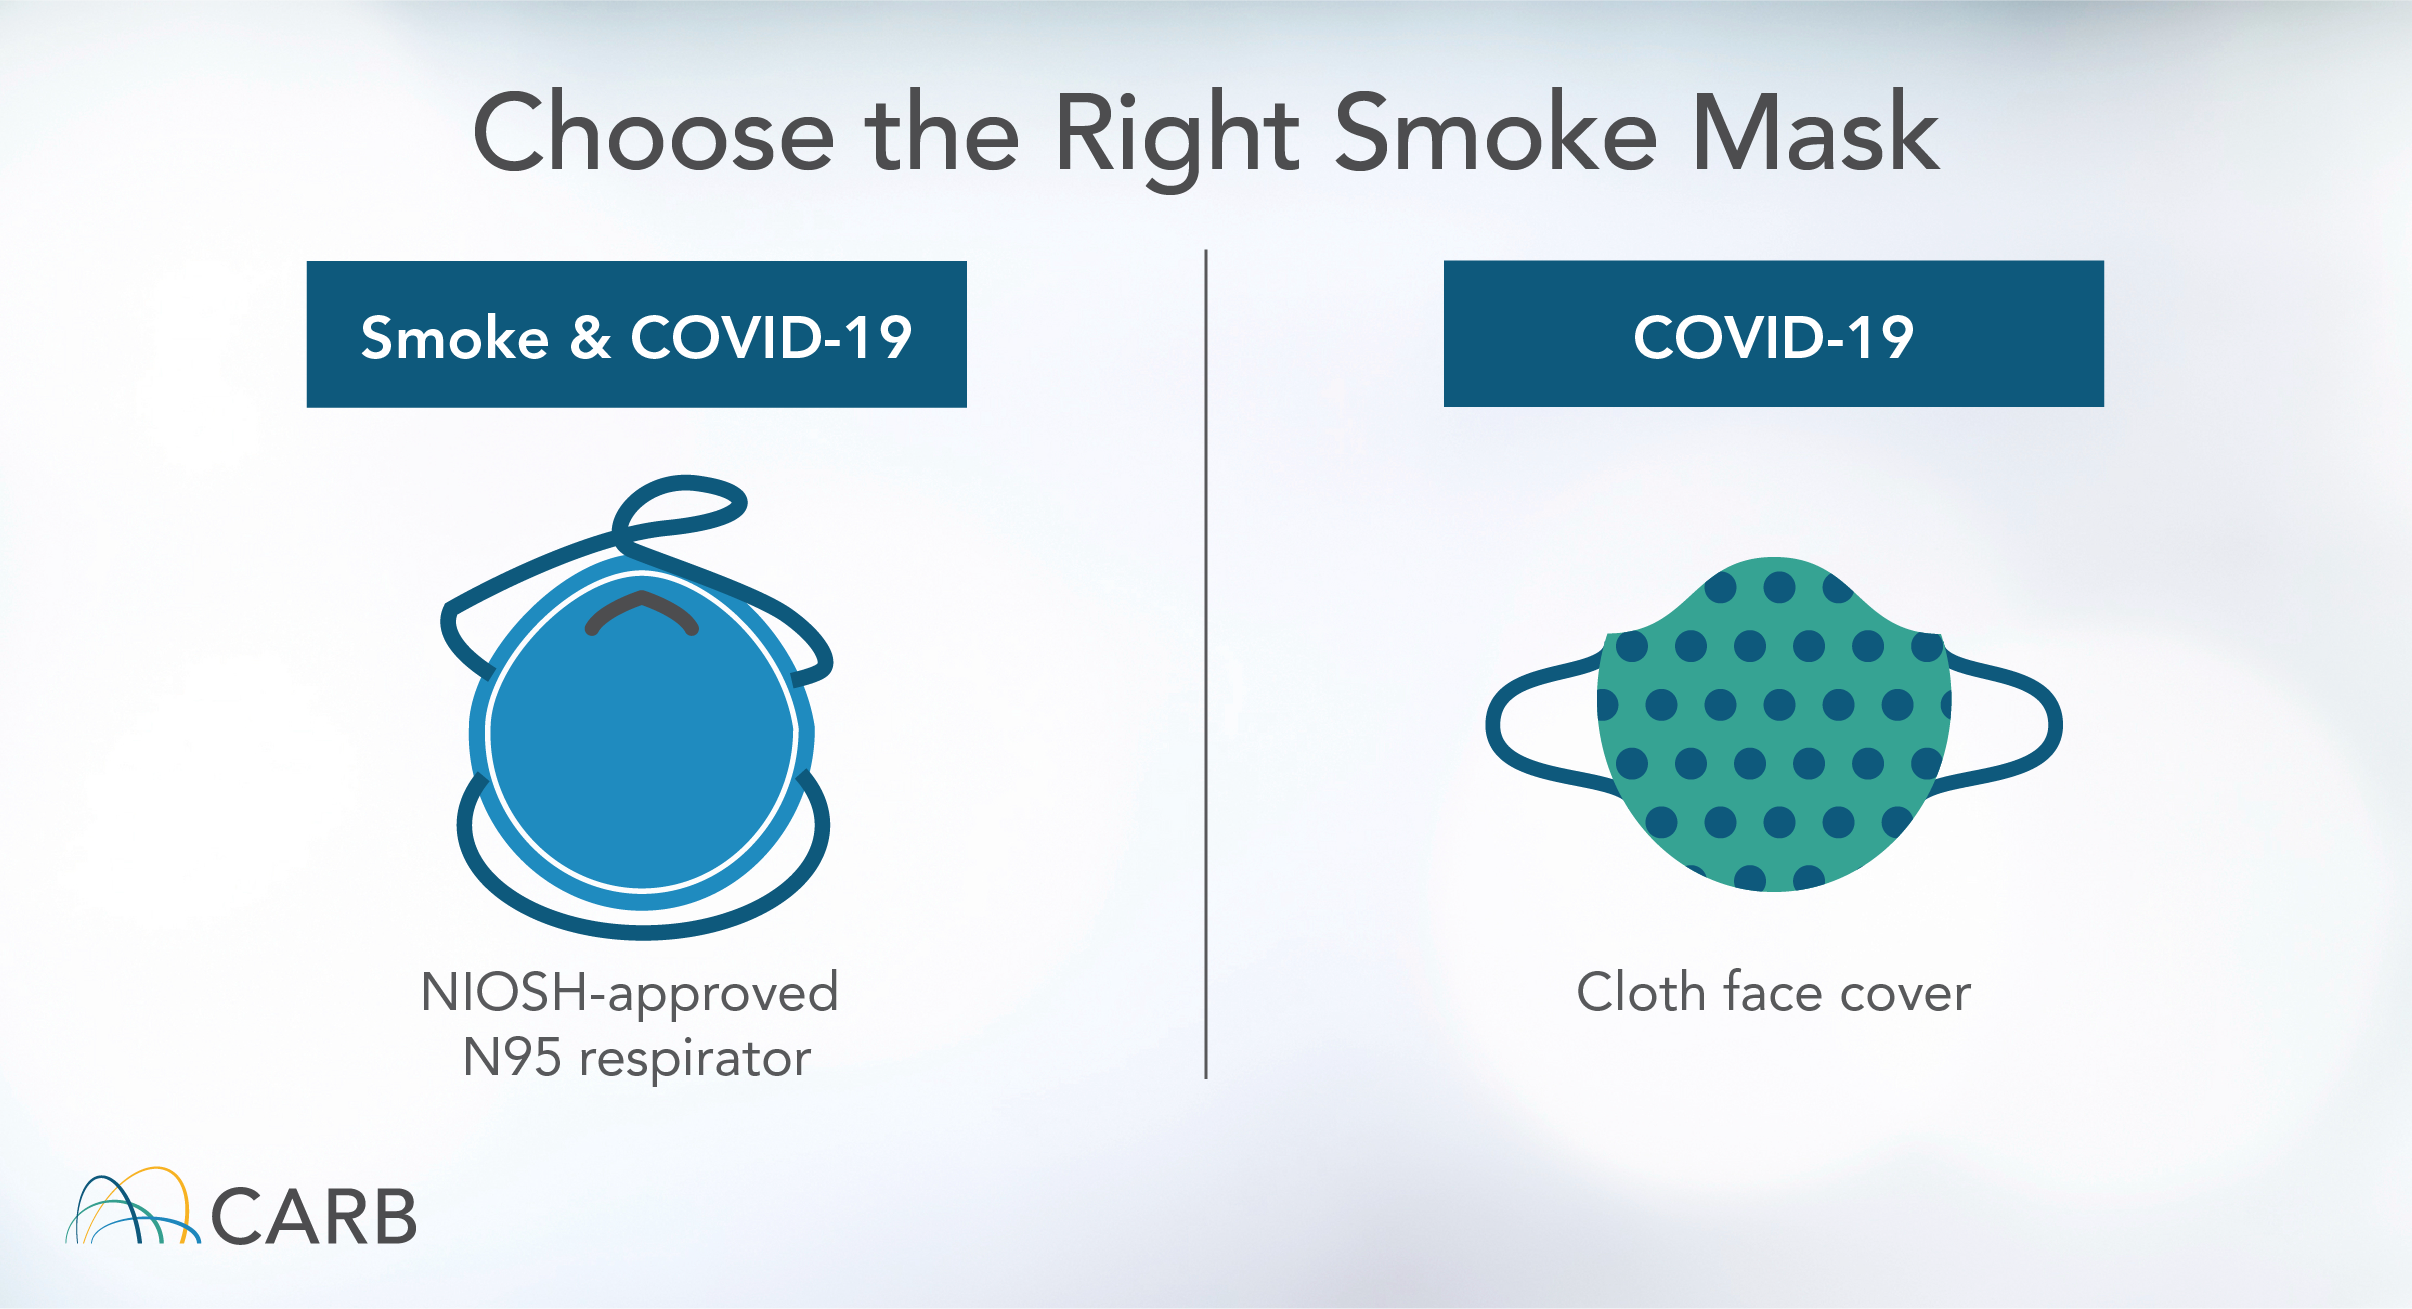 Choose the Right Mask Smoke: NIOSH-approved N95 respirator COVID-19: Cloth face cover